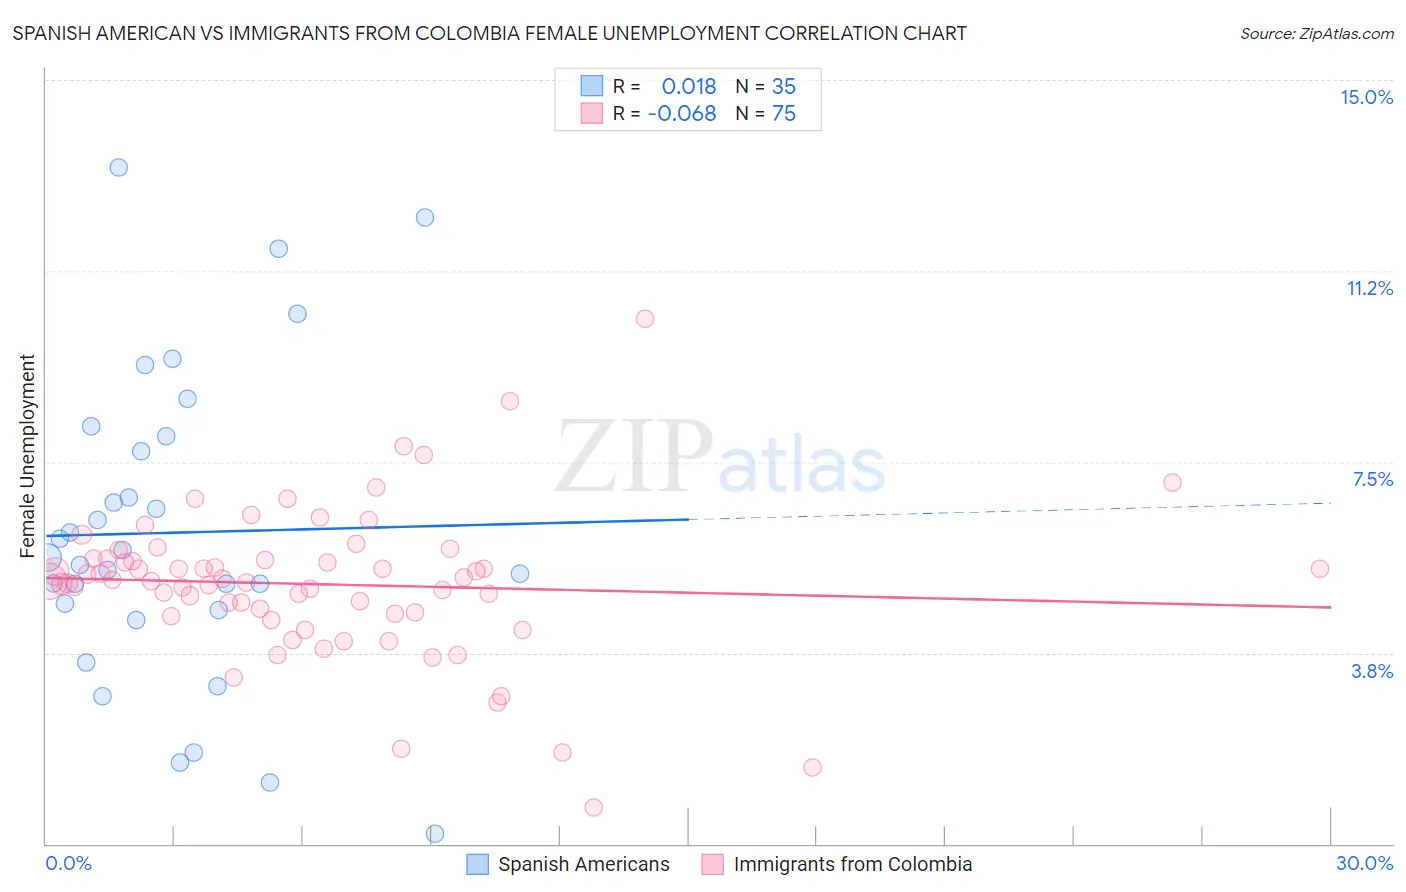 Spanish American vs Immigrants from Colombia Female Unemployment